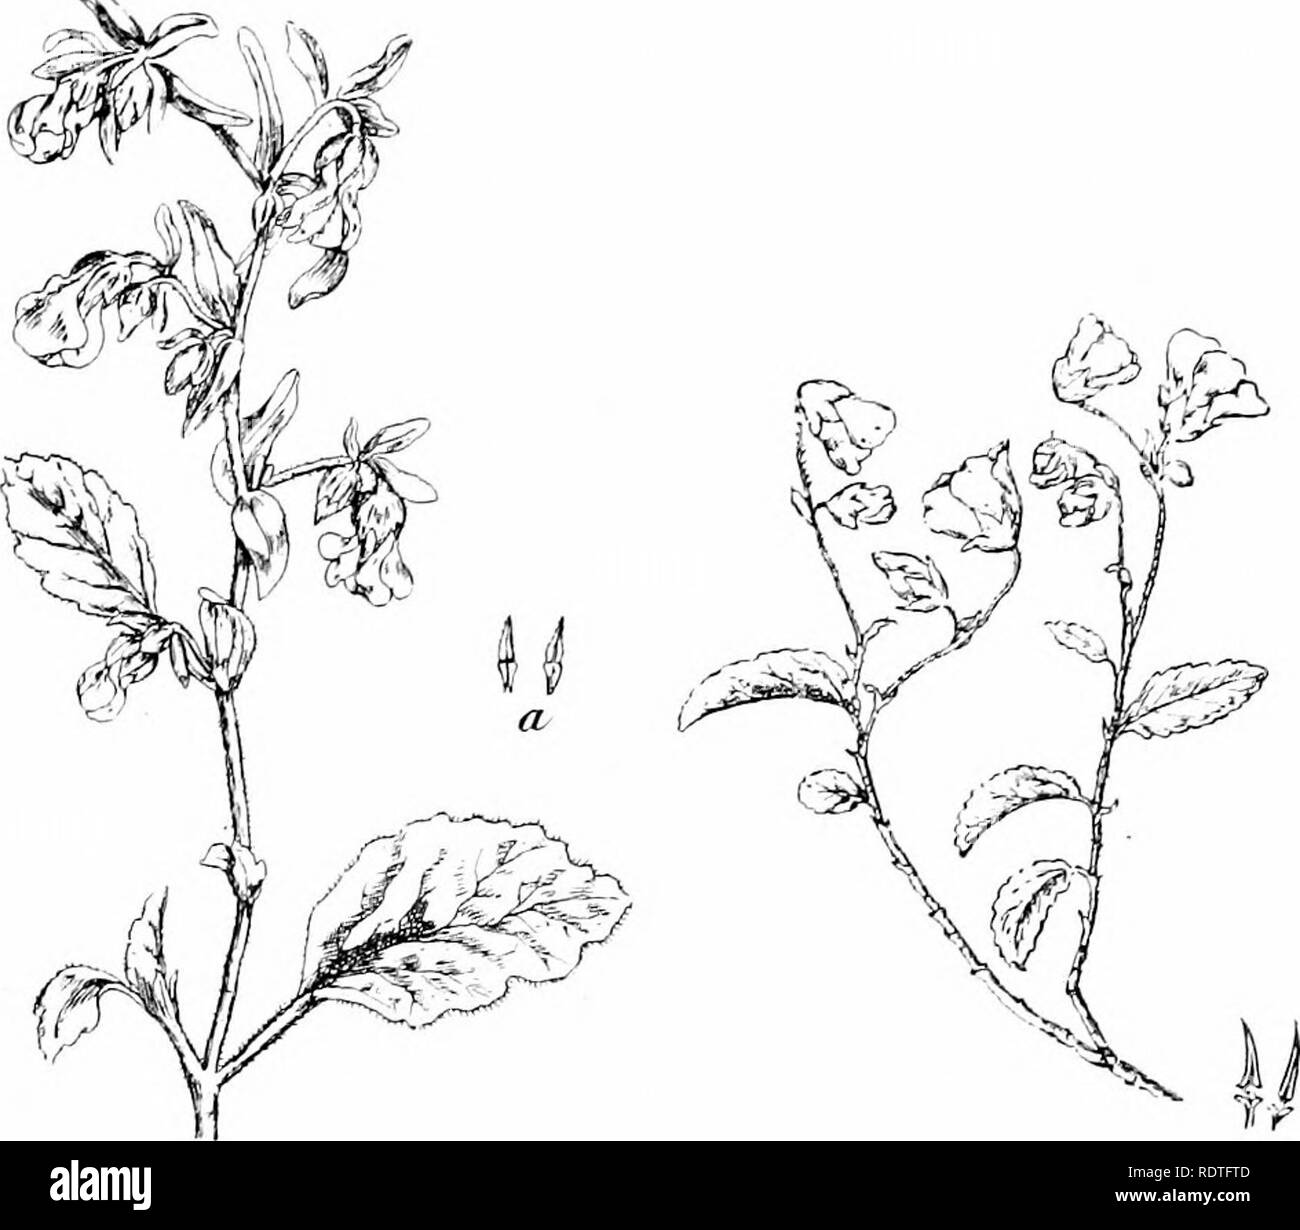 . Plants and their ways in South Africa. Botany; Botany. Classification of Plants 333 open. Petals twisted, unequal-sided. Stamens 10-15, ^ilter- nating in parcels of 2-3 with 5 slender staminodia. Small. t-fa Fig. 311. — Hcniia/Diia allhafolia, ]^. : a, stamens. (.After &quot; I-lotanical Ma- gazine &quot;.) I'k; 312. —rli-rmariniu {.Malicy/iin) uveitis, H. : a stamens. Eastern trees with an aliuiidance of white or rosy floH-ers petals become papery and enlarged, rernainitig on. AAA. Floivers perfect, no sta- minodia. Hermannia is a very common, more or less prostrate, weed with the habit of  Stock Photo